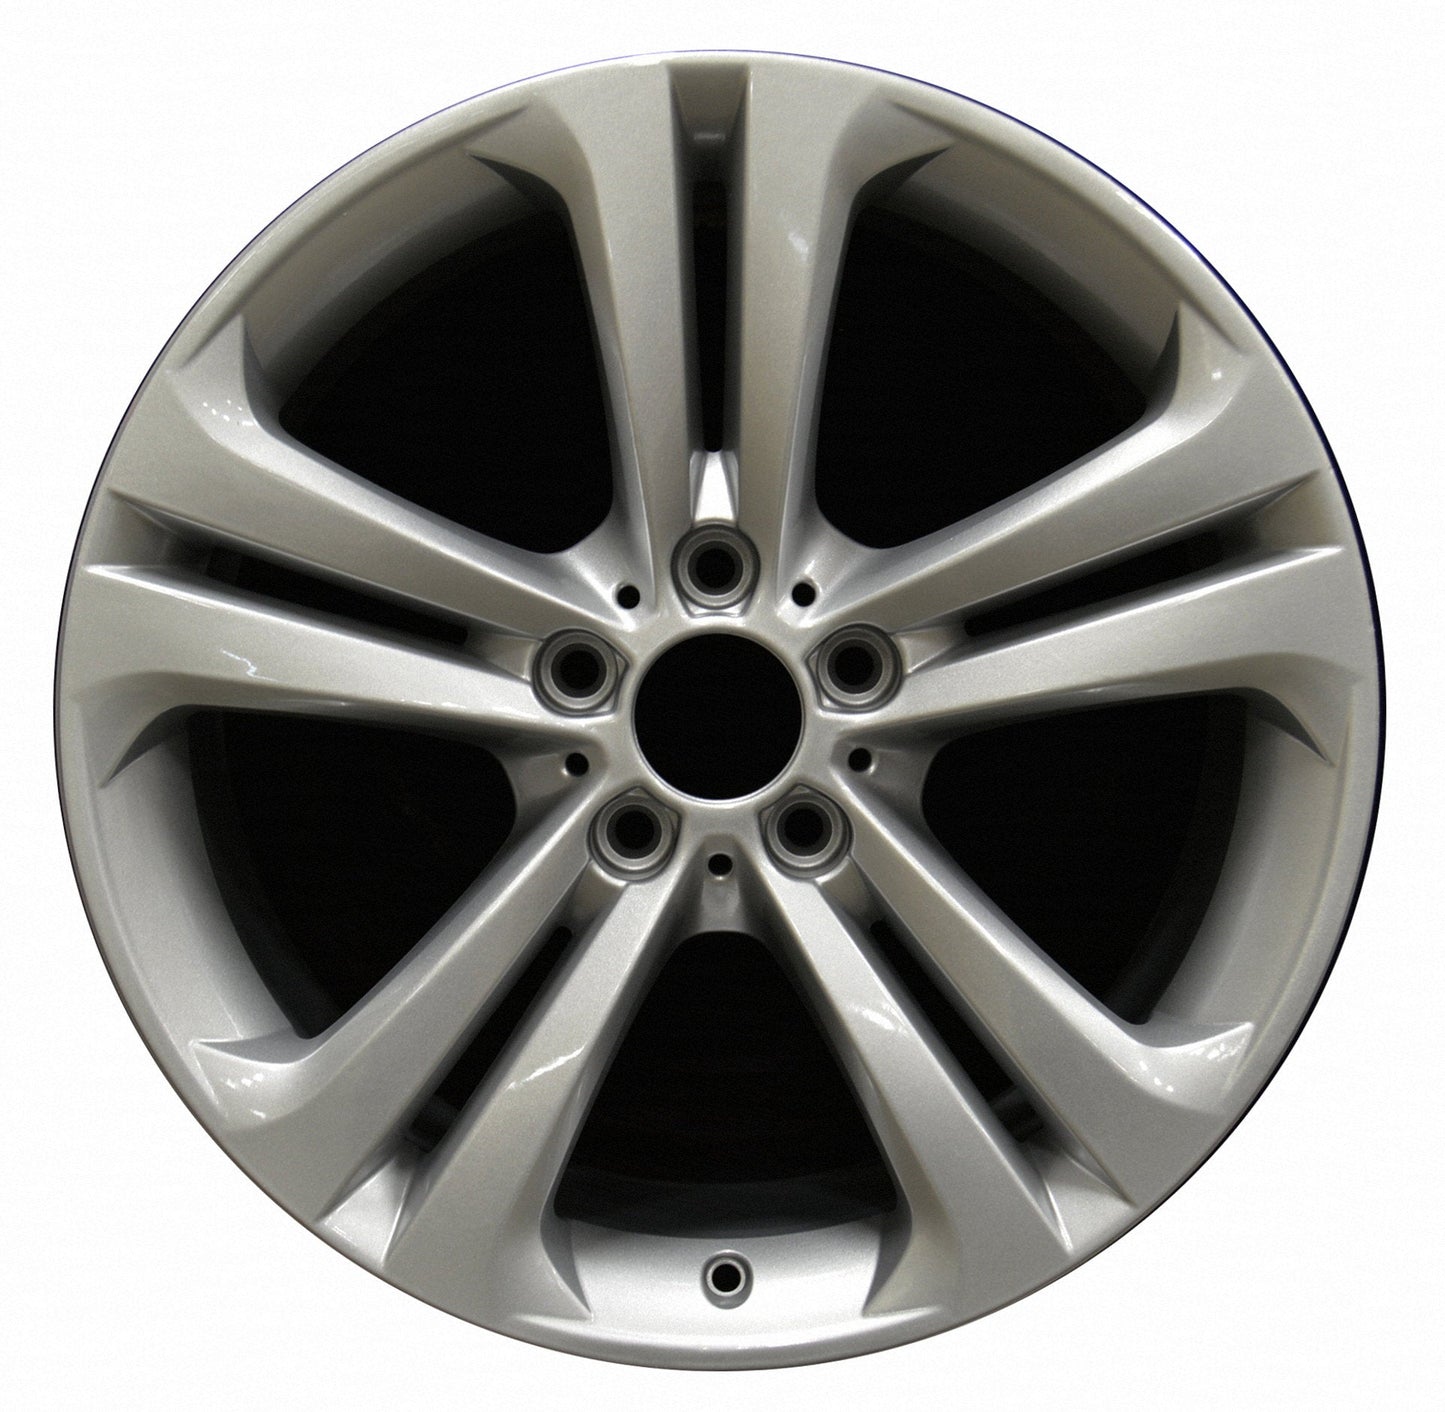 BMW 320i  2012, 2013, 2014, 2015 Factory OEM Car Wheel Size 19x8.5 Alloy WAO.71547RE.PS01.FF